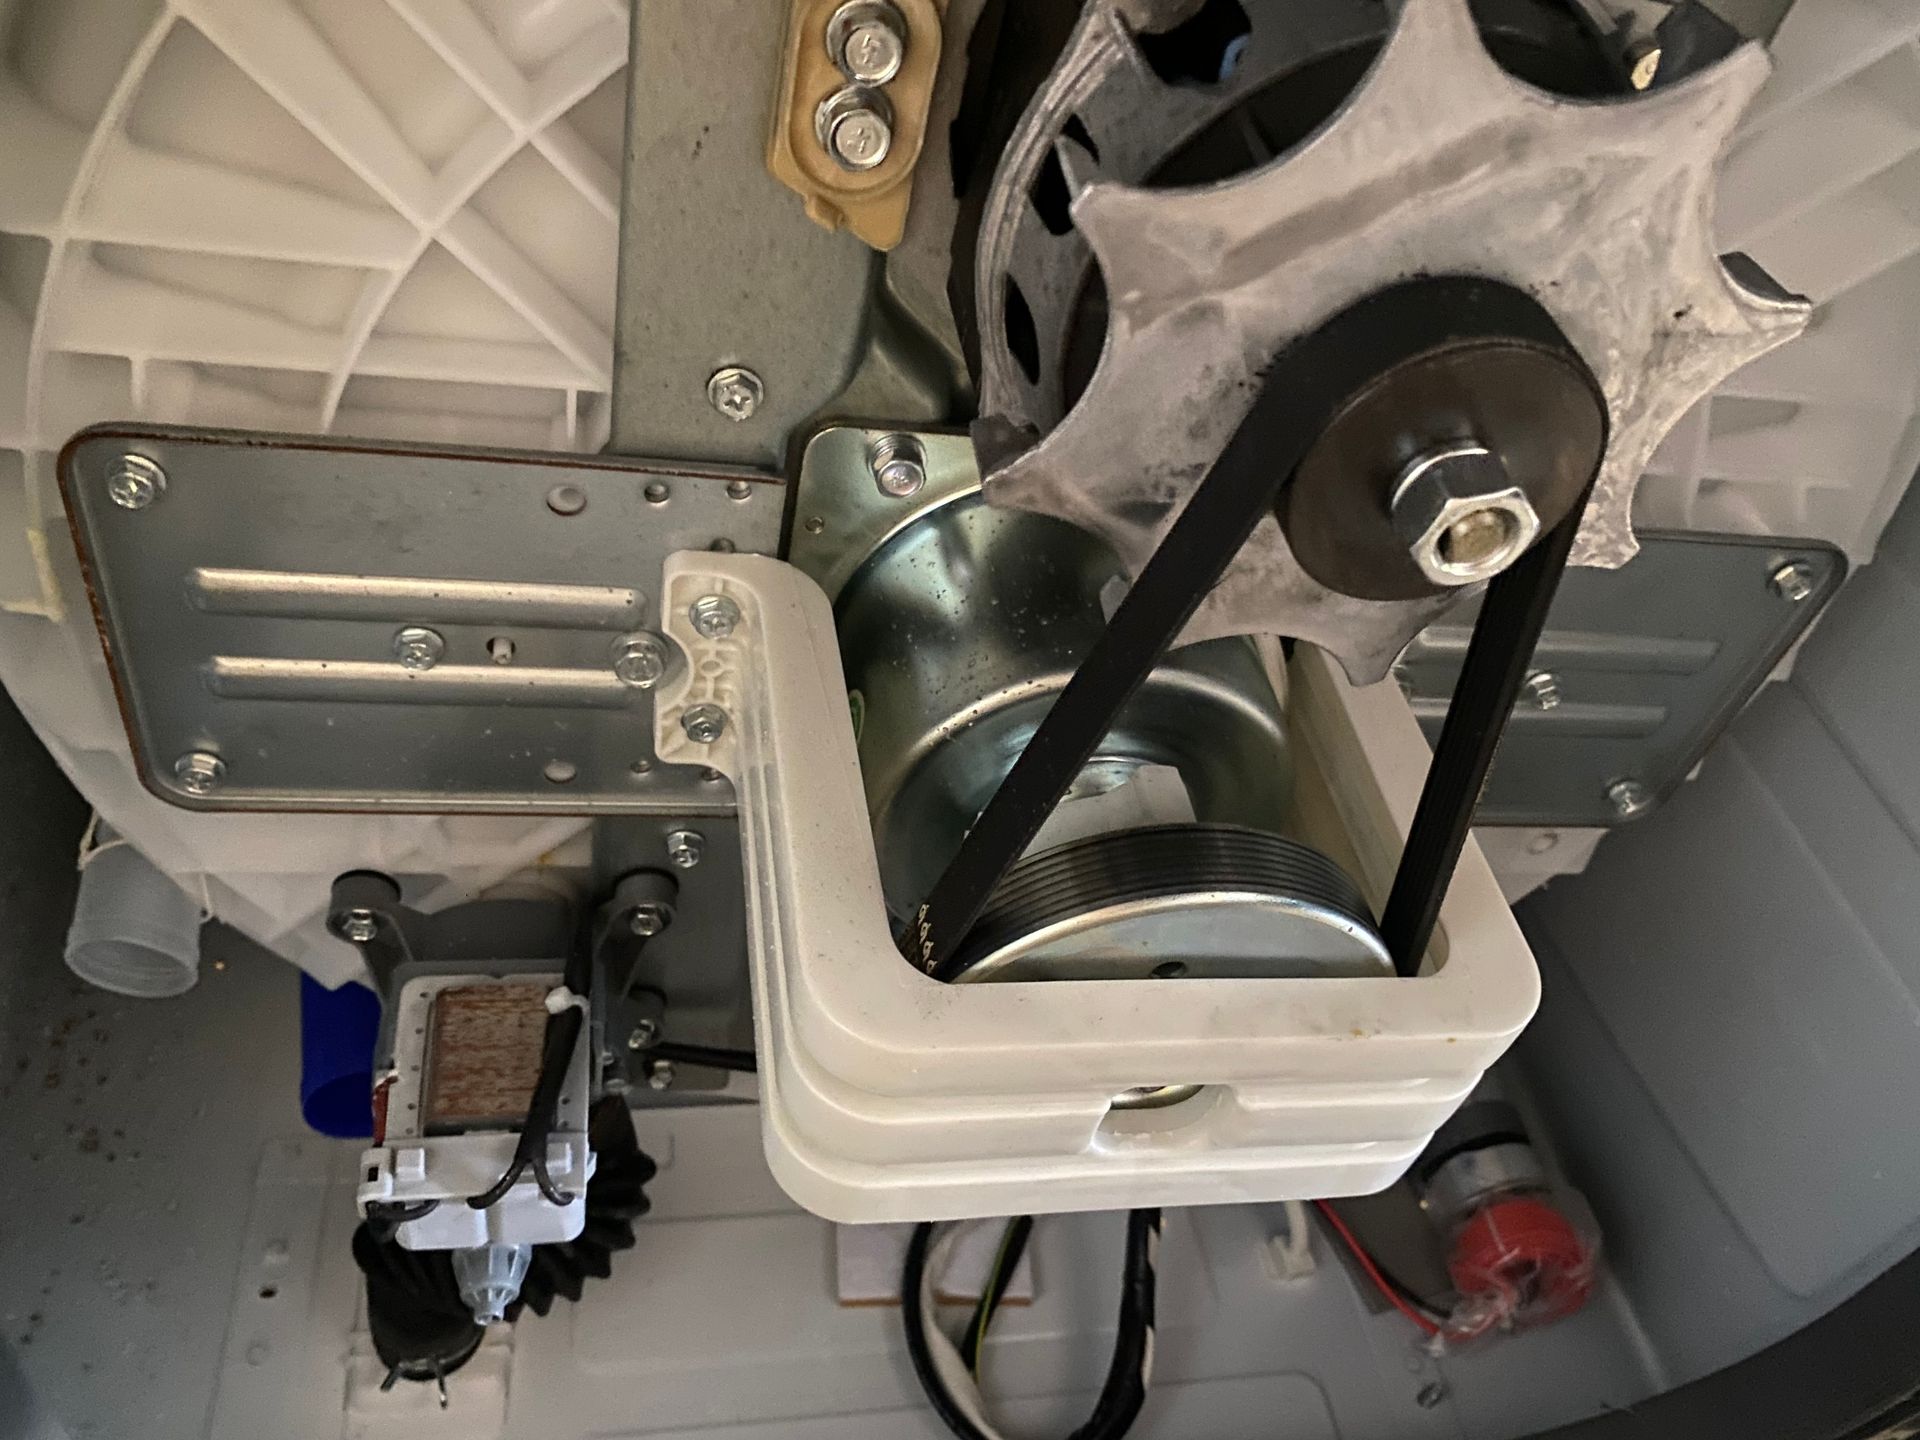 Washer repair by Level Appliance Repair